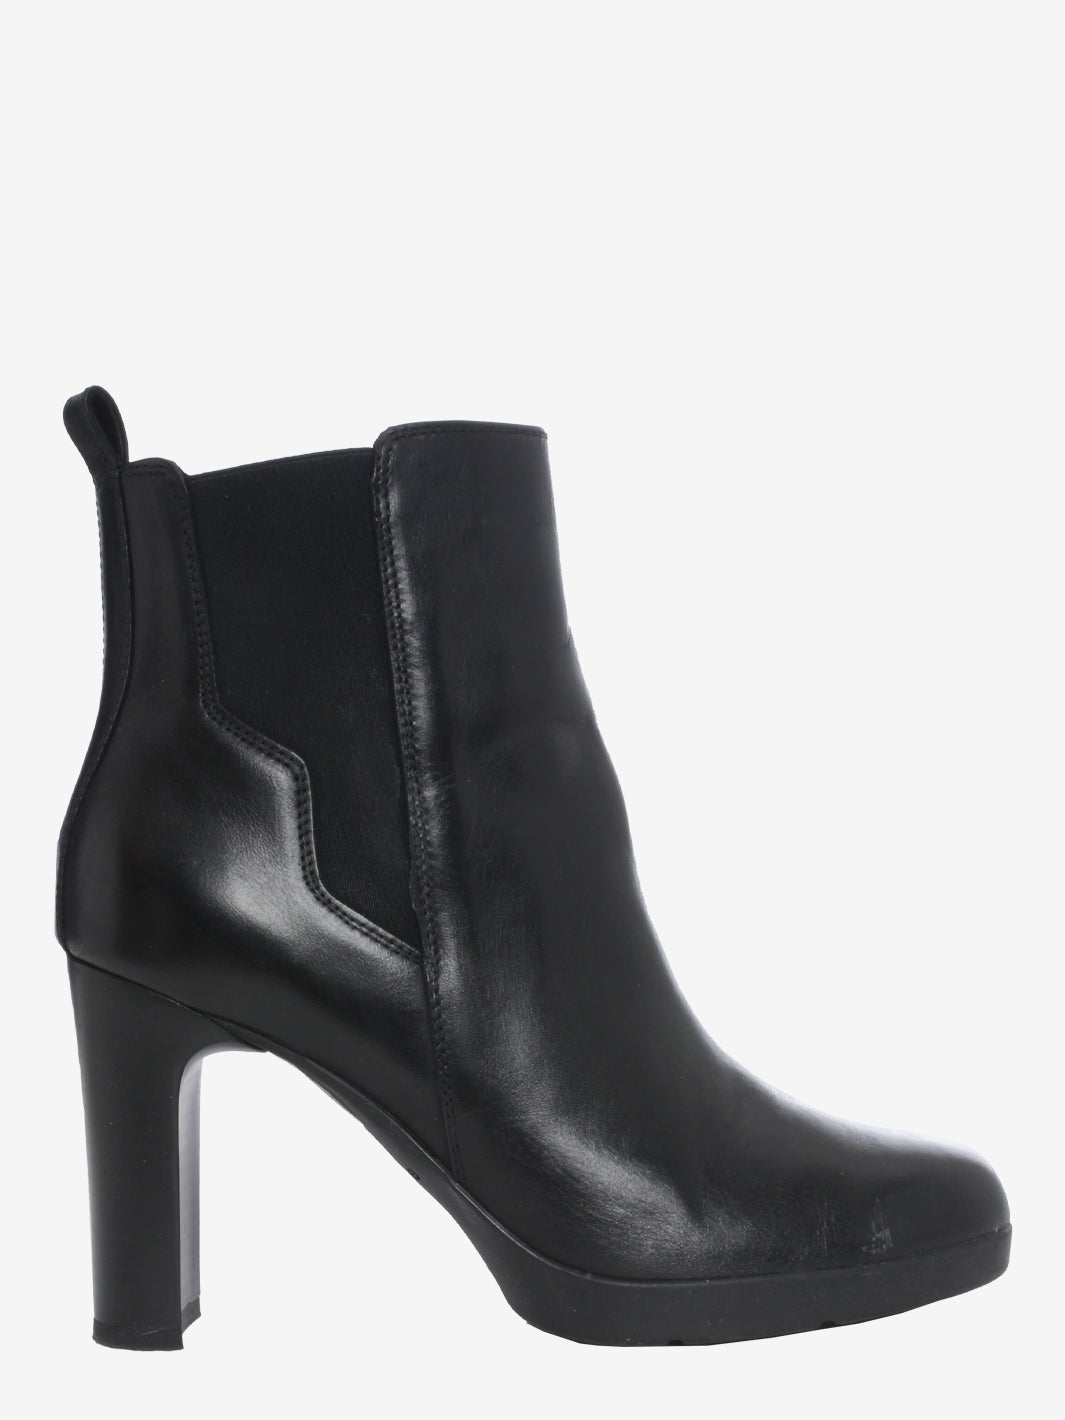 Geox Black Leaher Ankle Boots